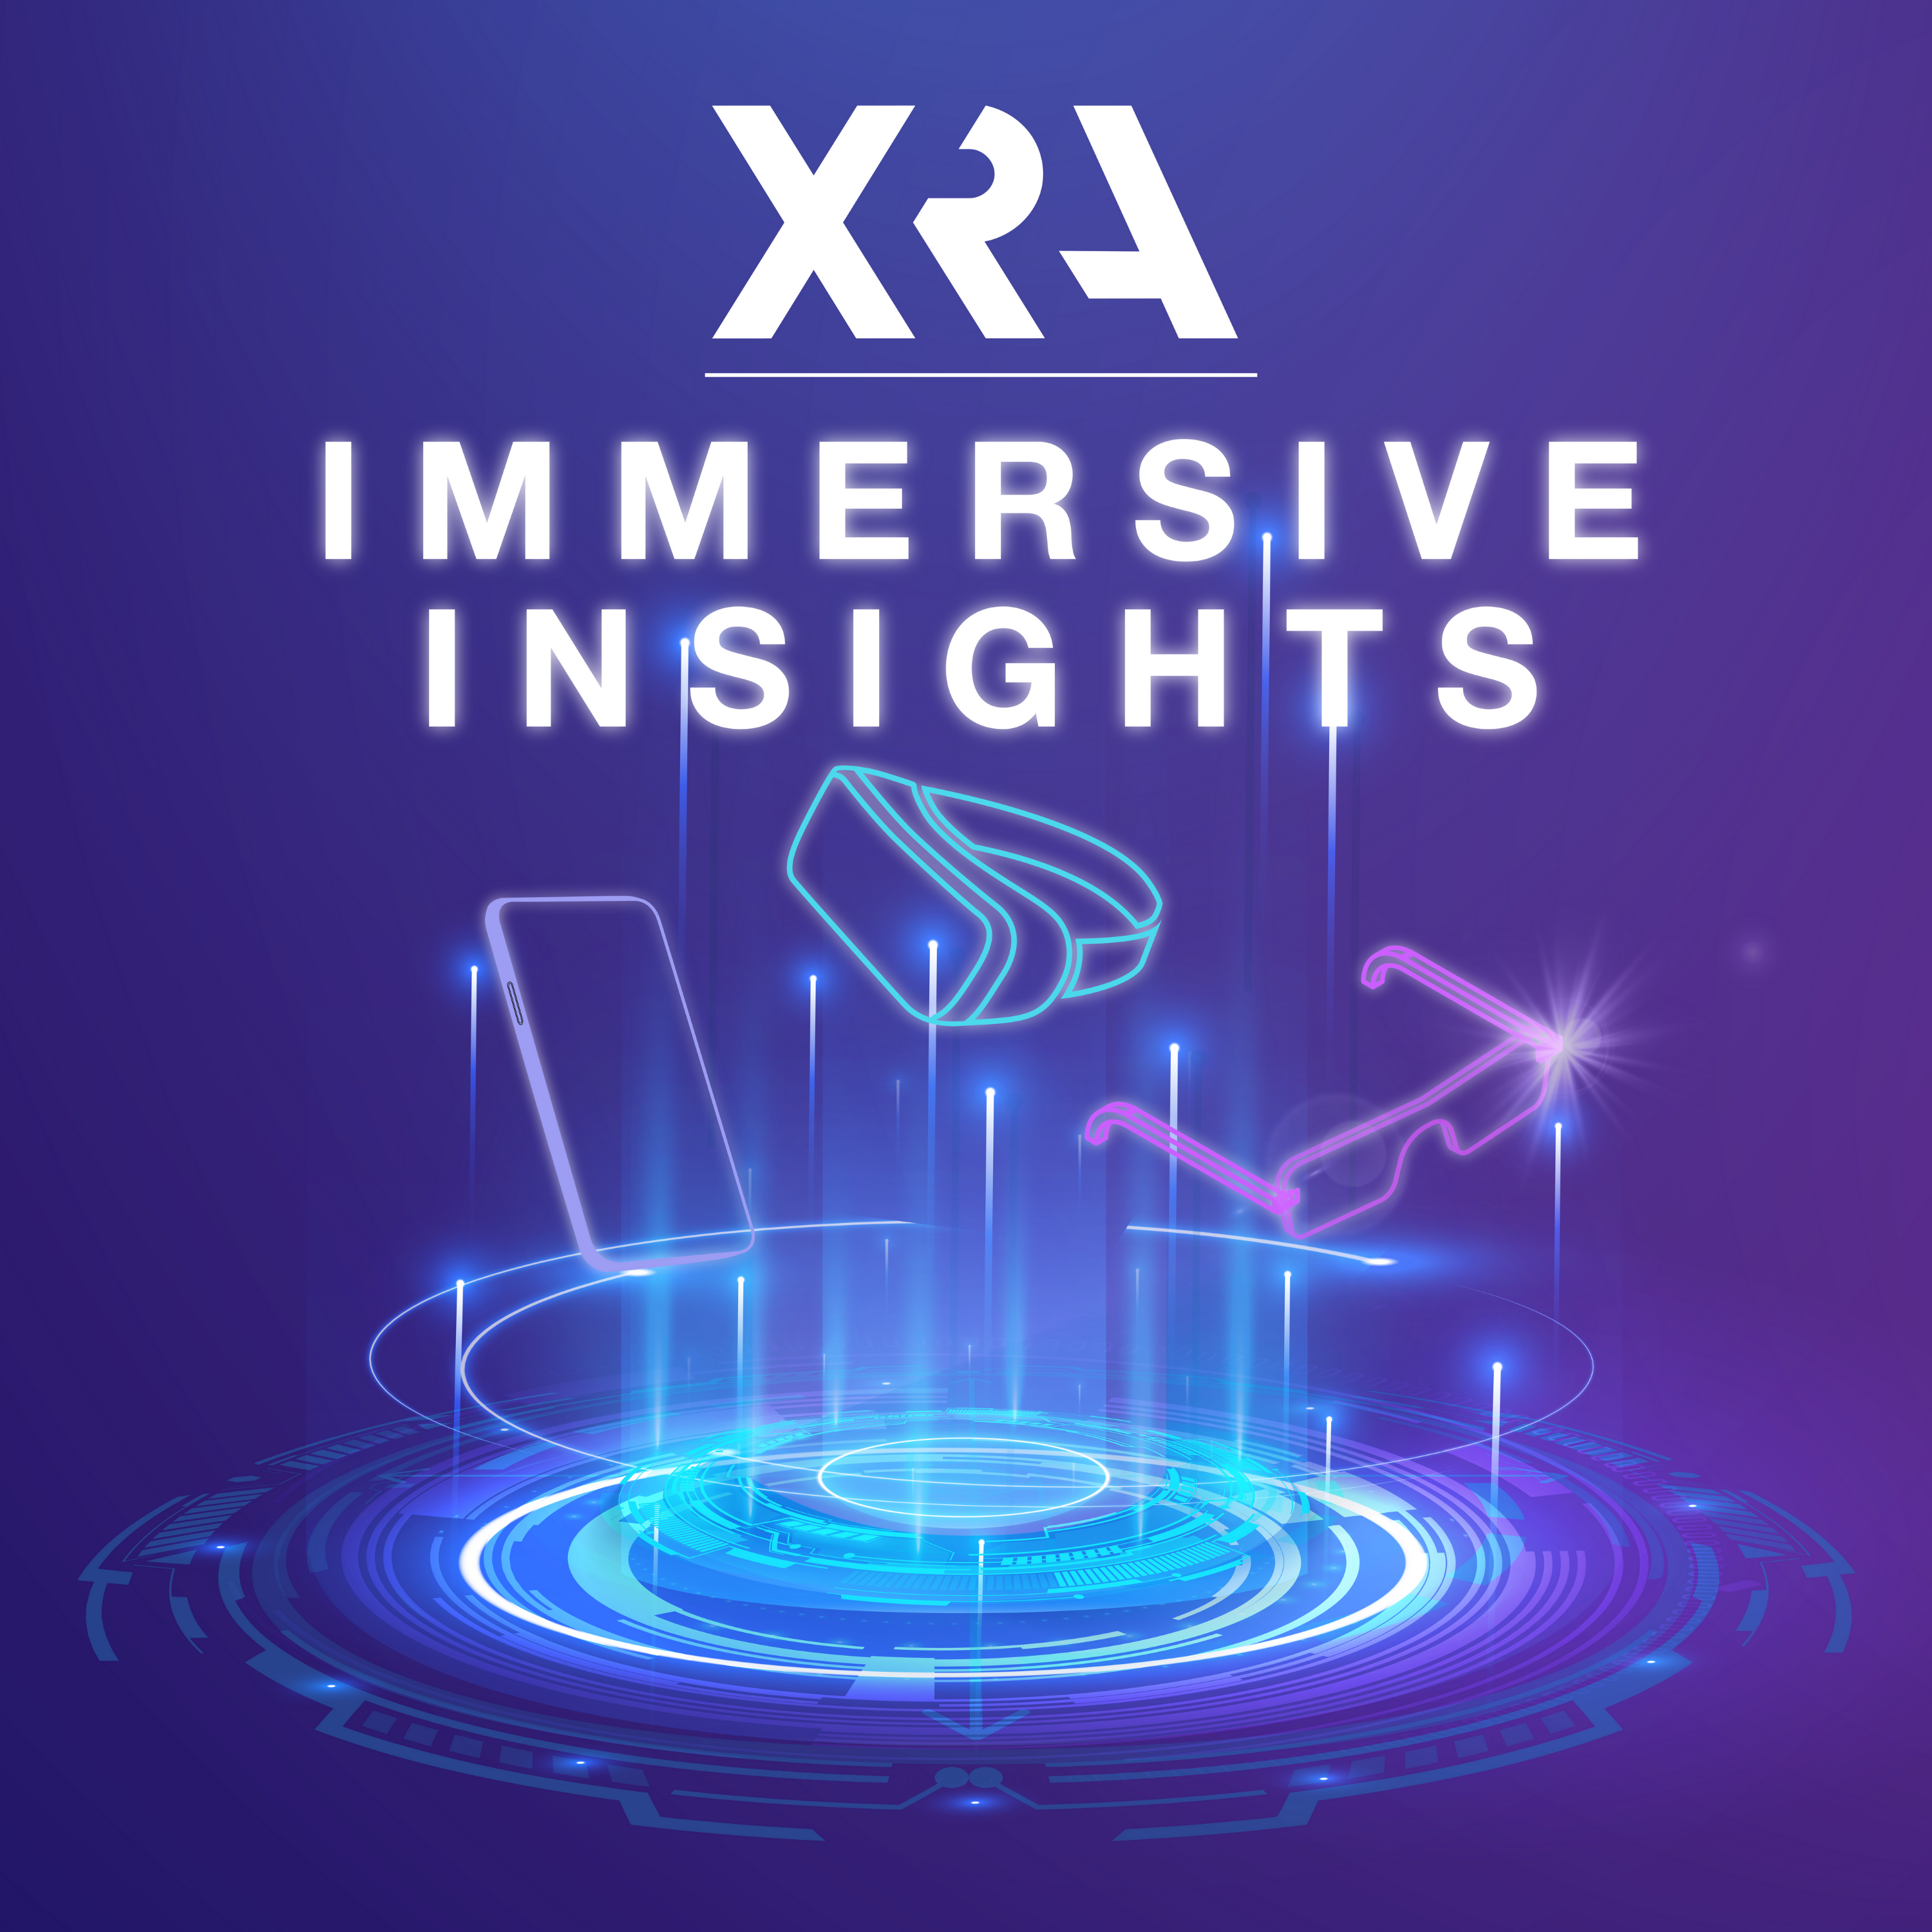 CHECK OUT XRA’S PODCAST SERIES “IMMERSIVE INSIGHTS”